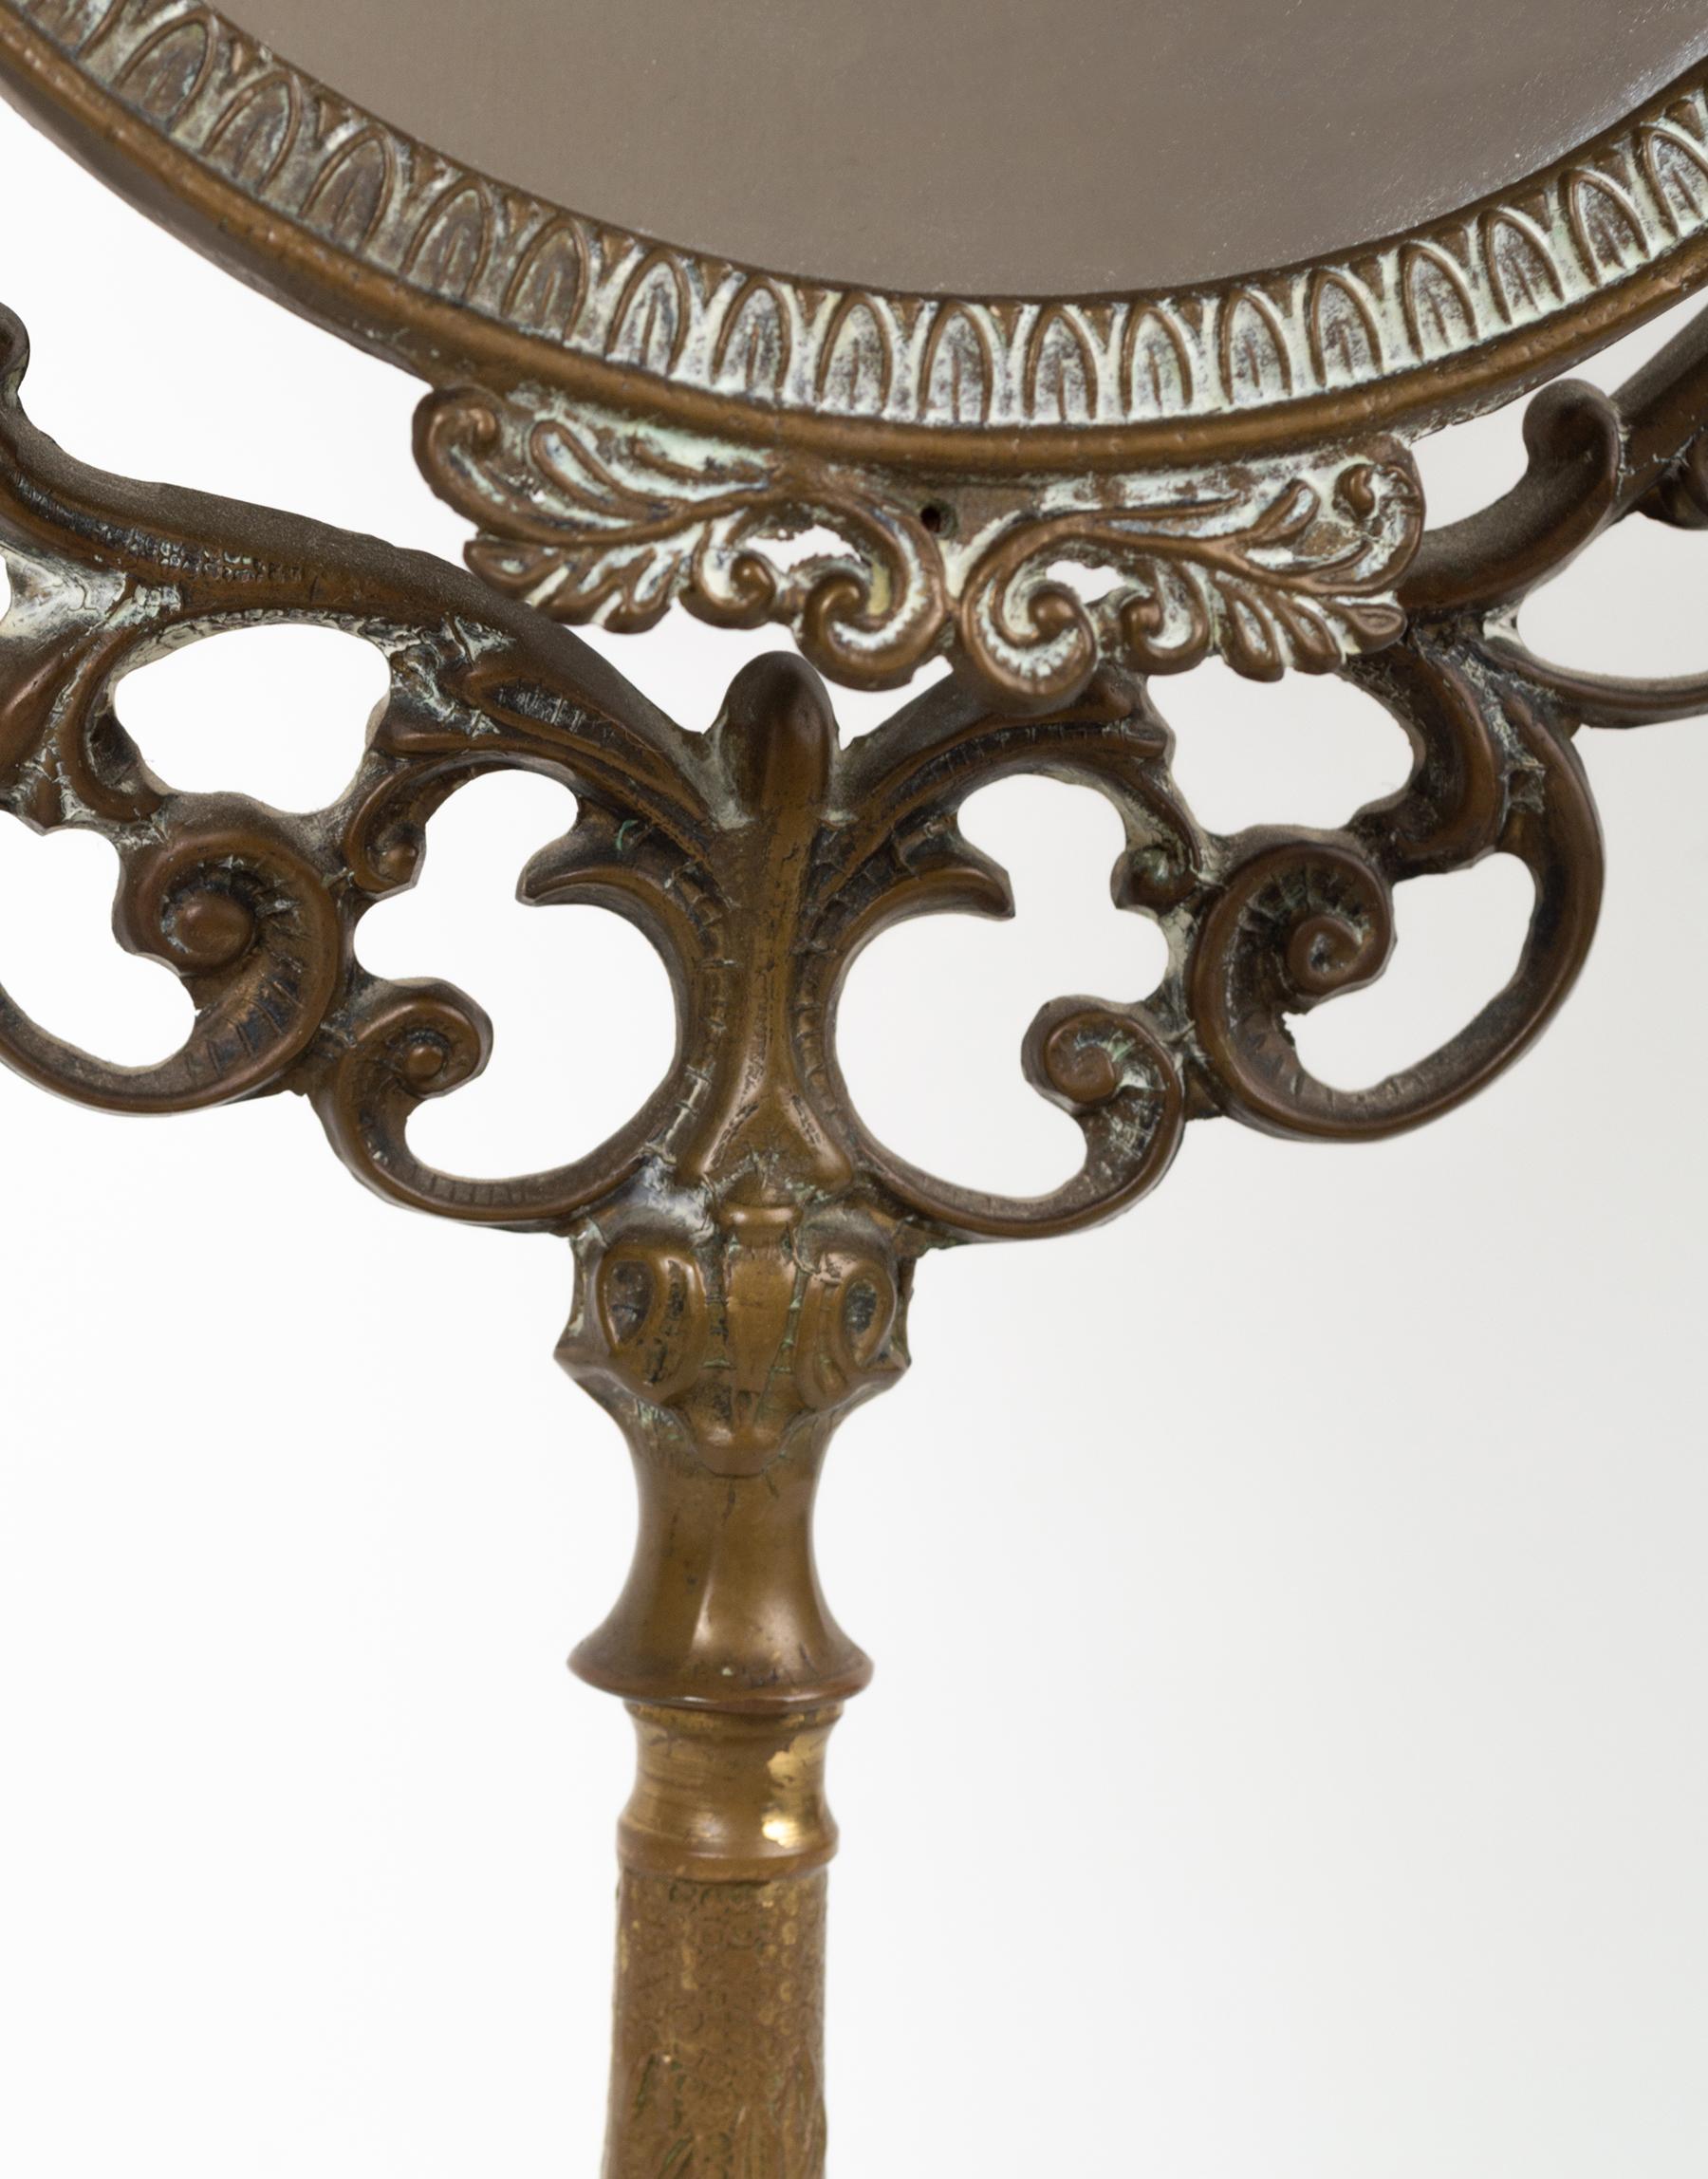 Antique Art Nouveau brass vanity mirror, England, C.1900.
Presented in very good condition commensurate of age, with expected patina to the brass.